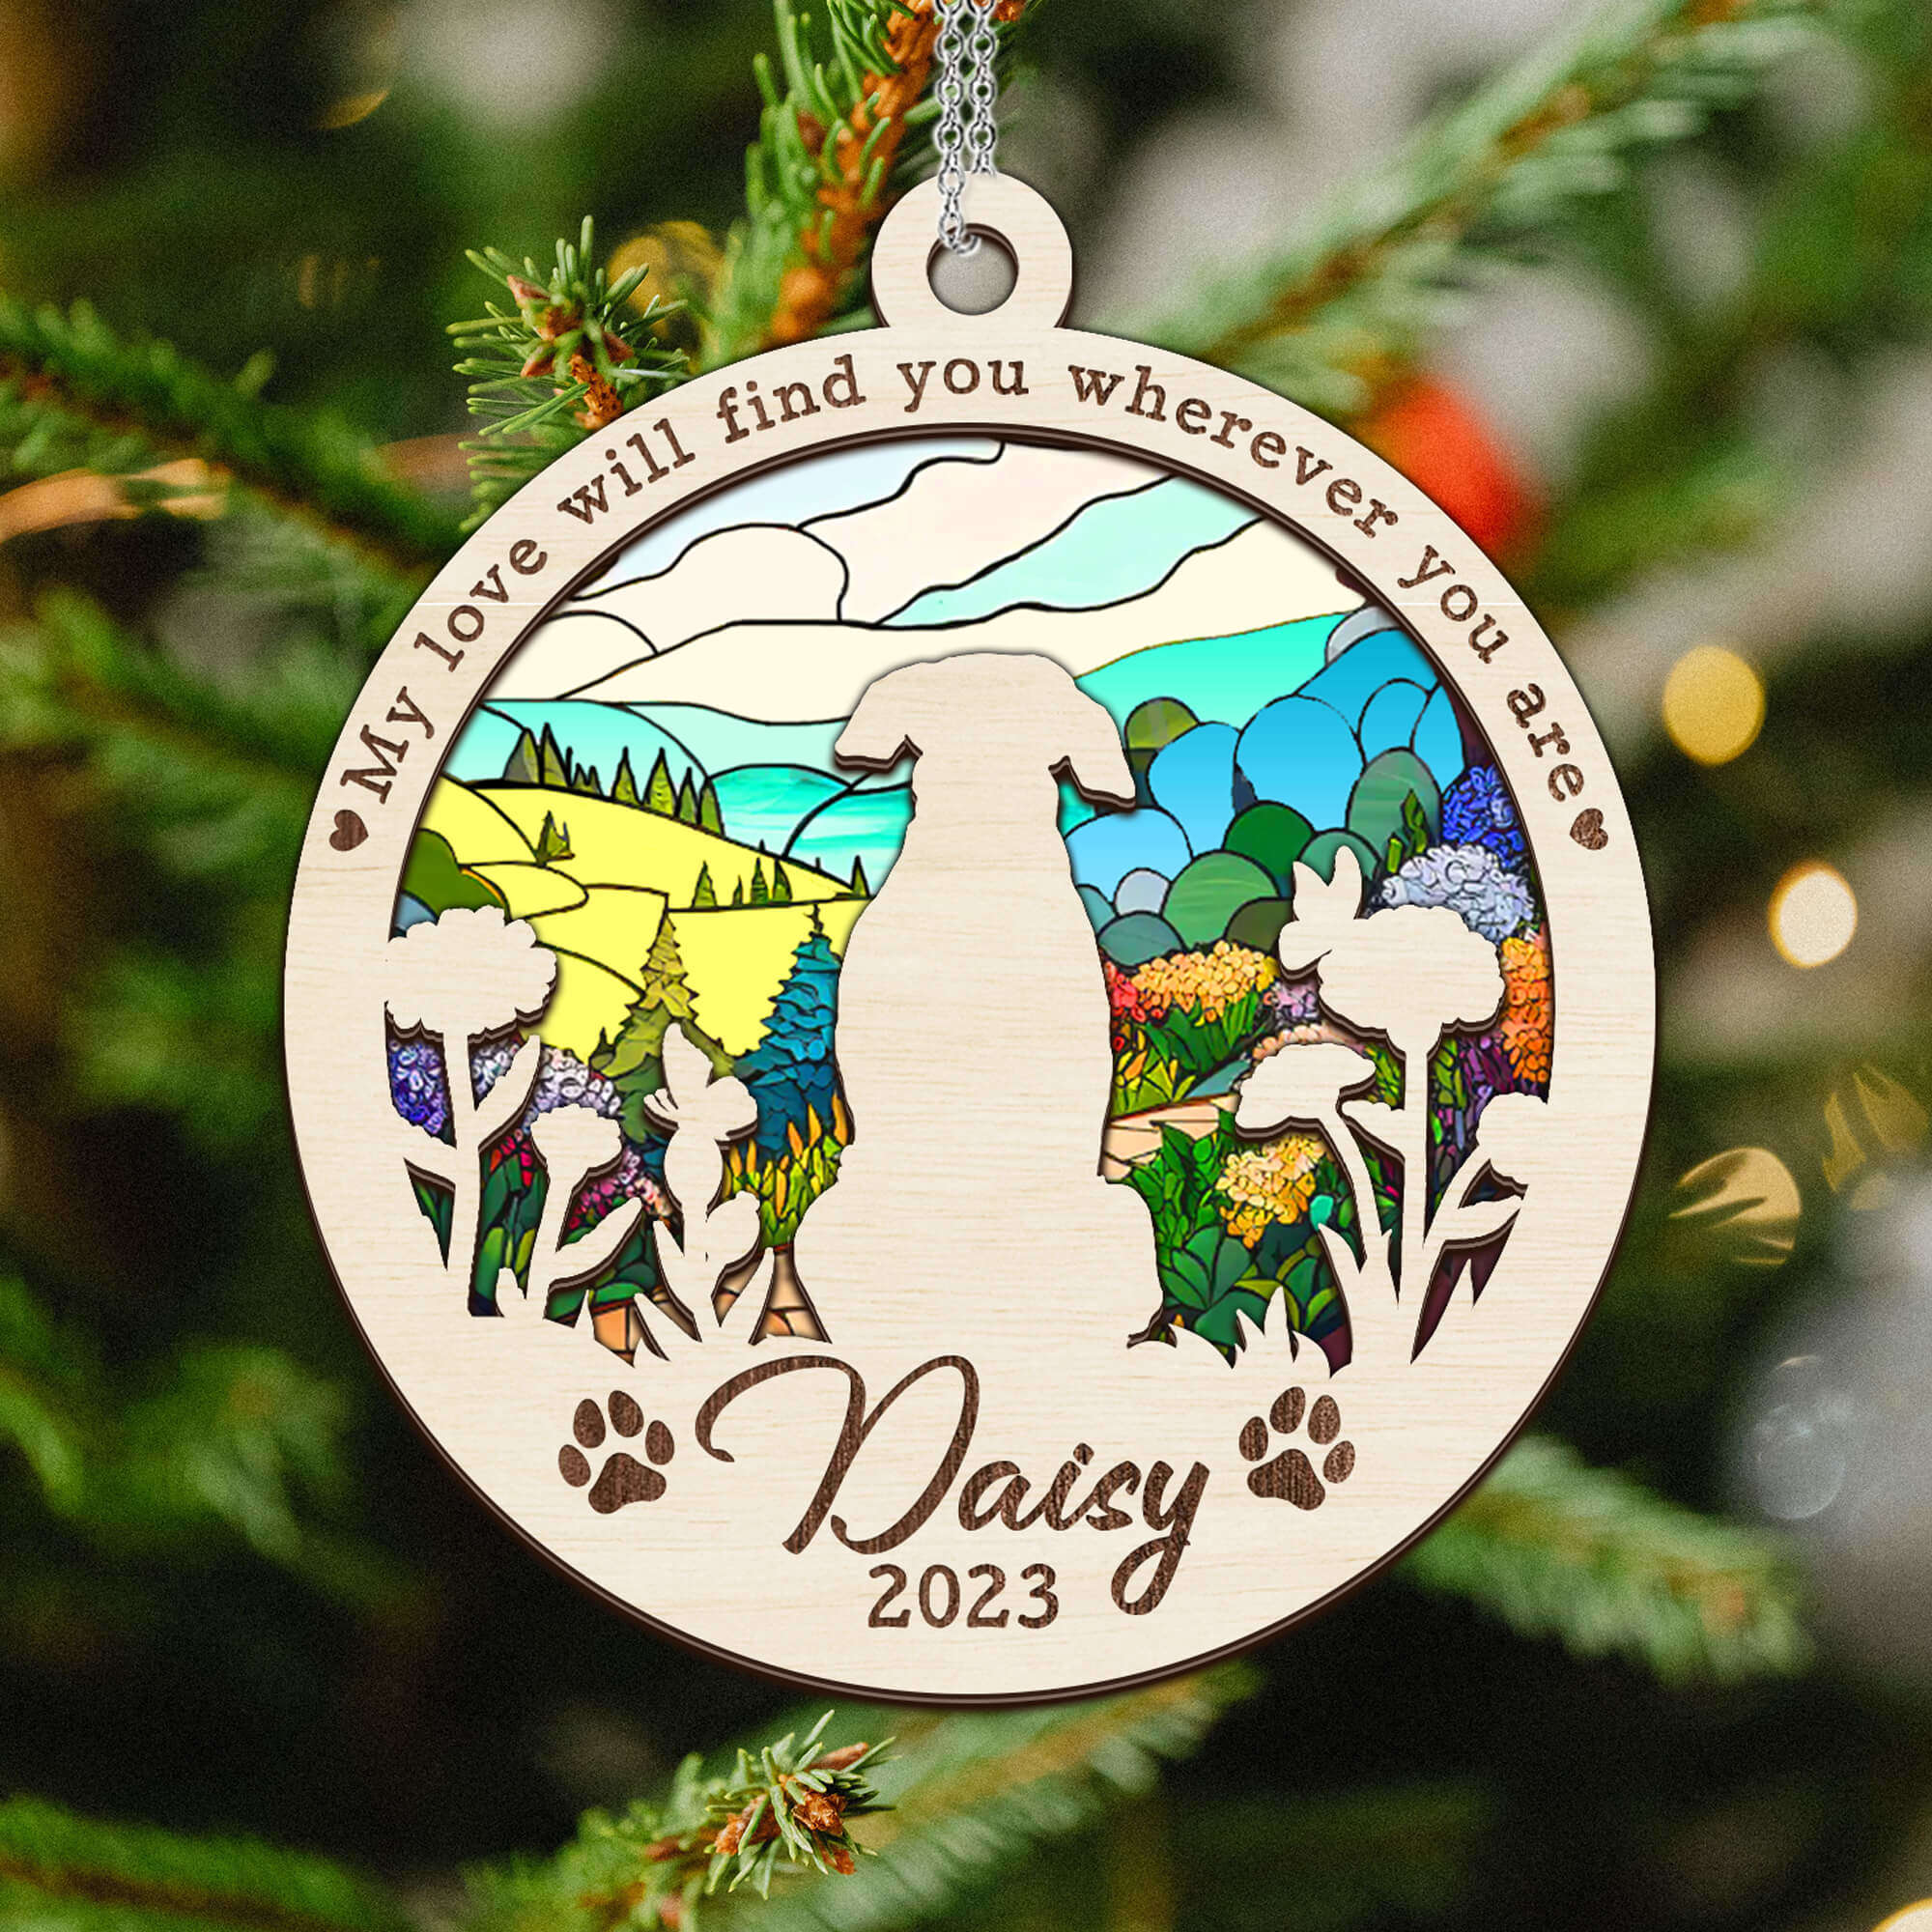 Christmas Suncatcher Ornament Gifts, Personalized Christmas Gifts for Dog Cat Lovers 6x6 Inches Unifury